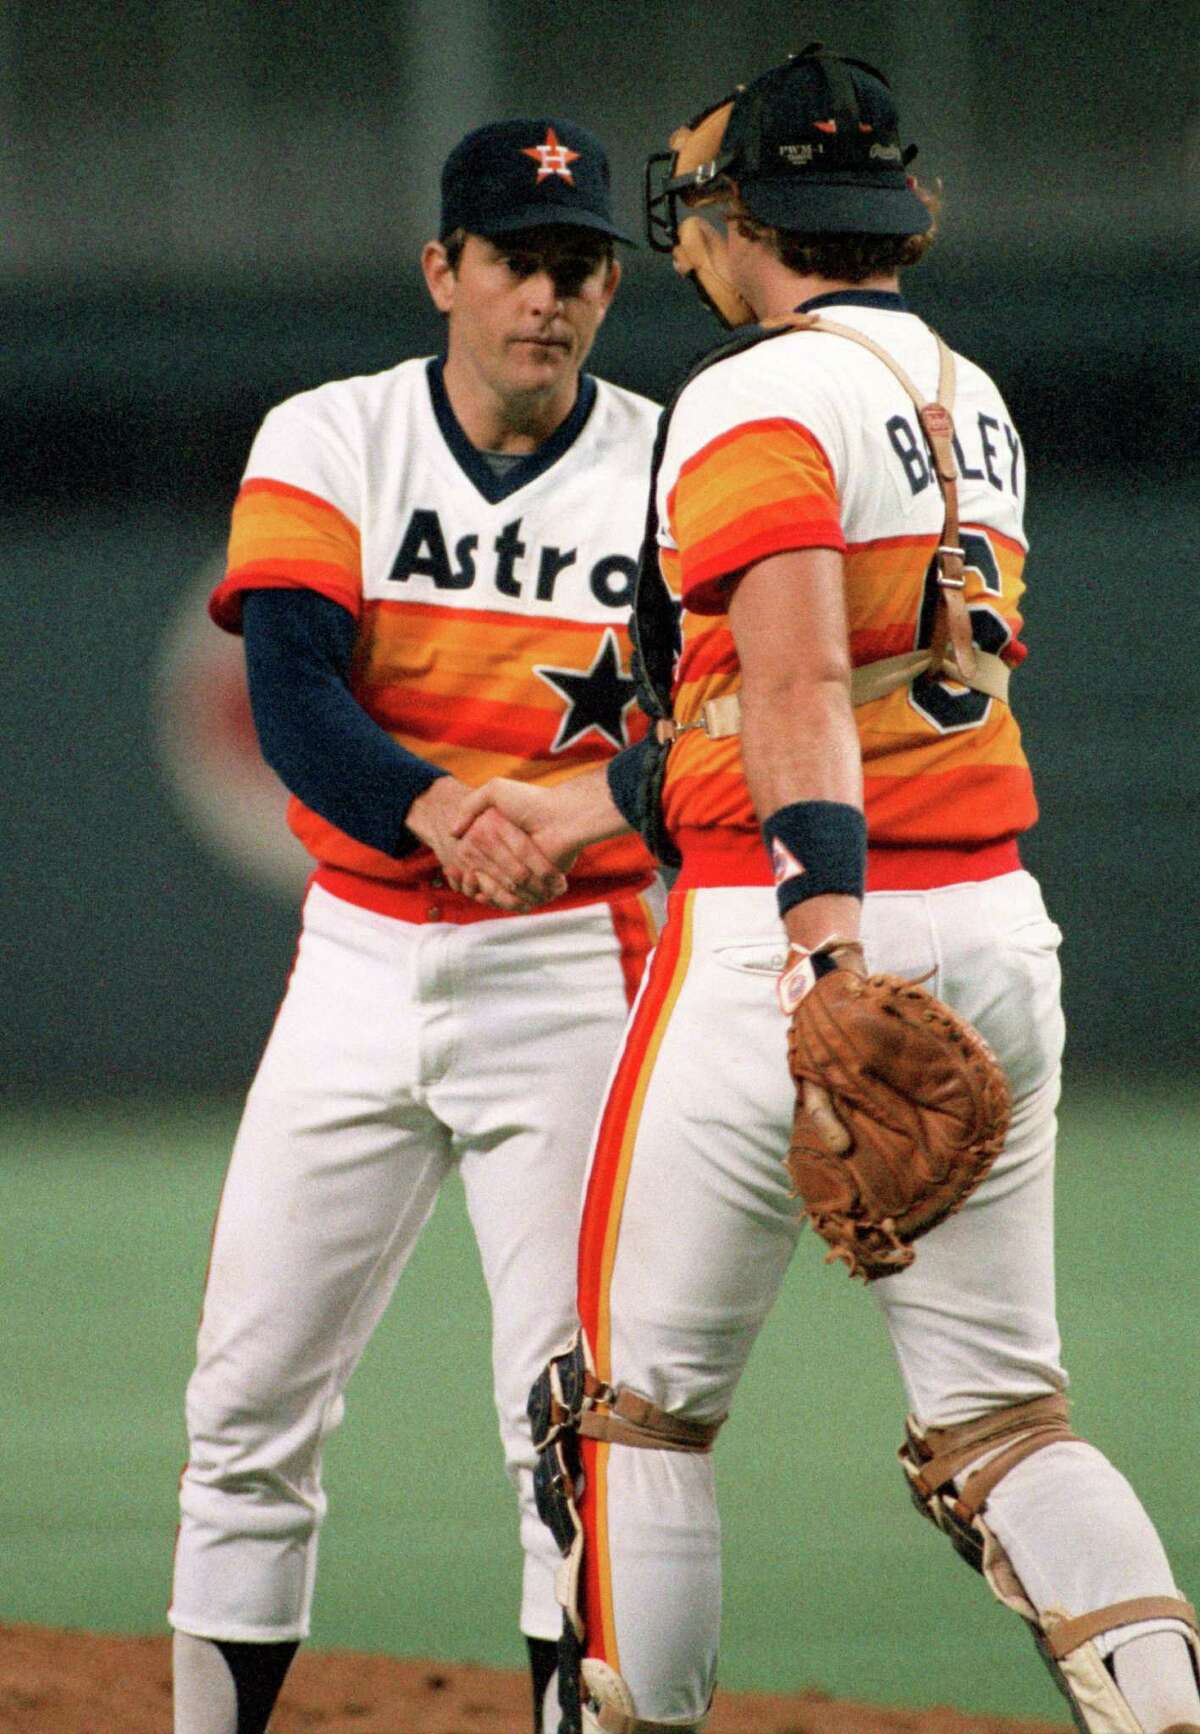 Acosta] Throwback (Astros) uniforms coming this Friday against the